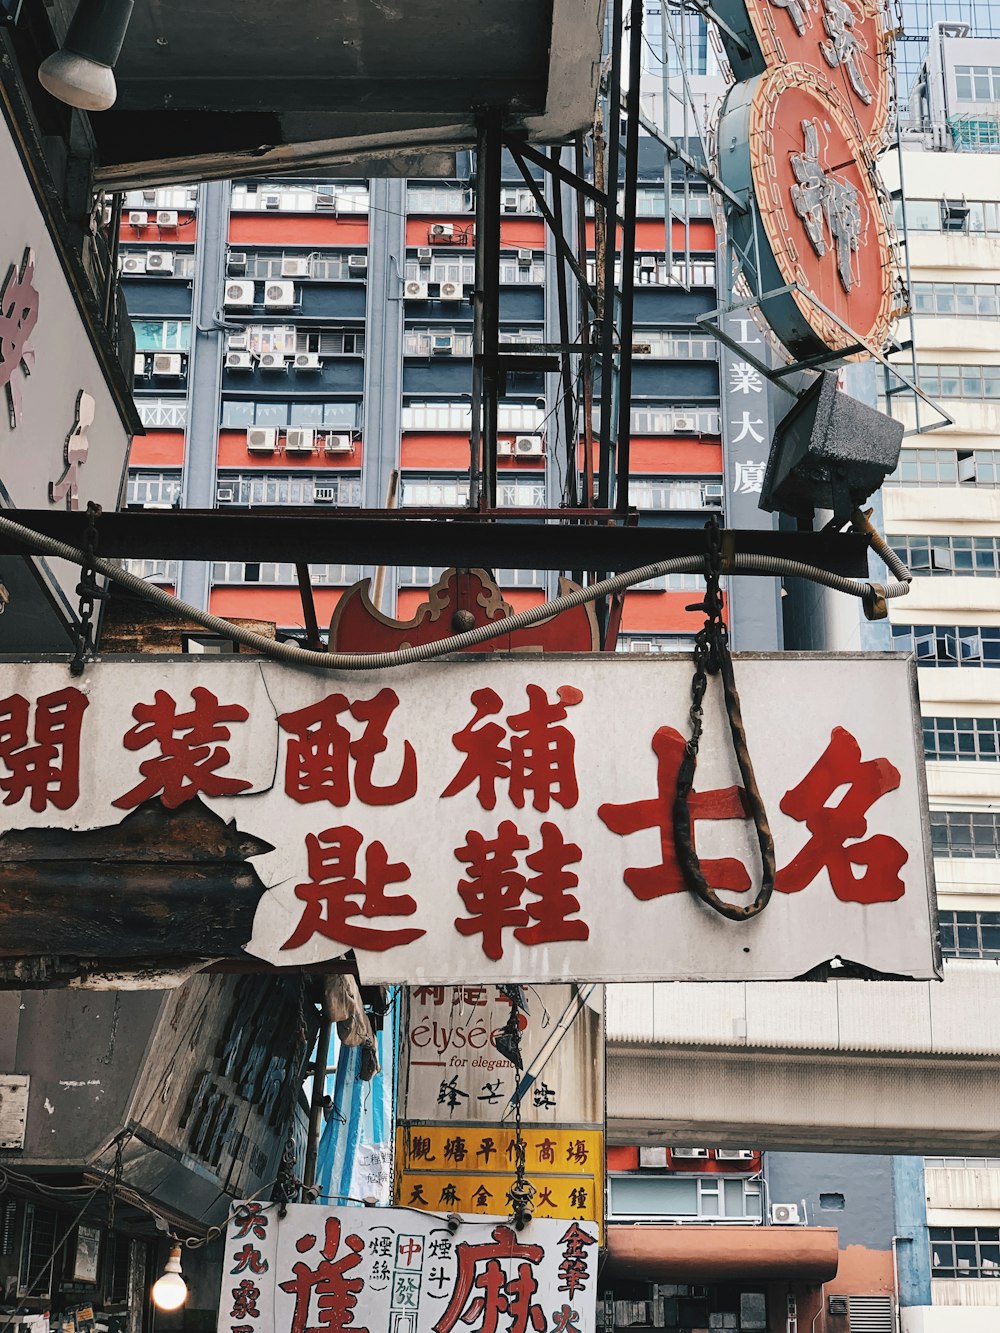 Chinese text signage on street